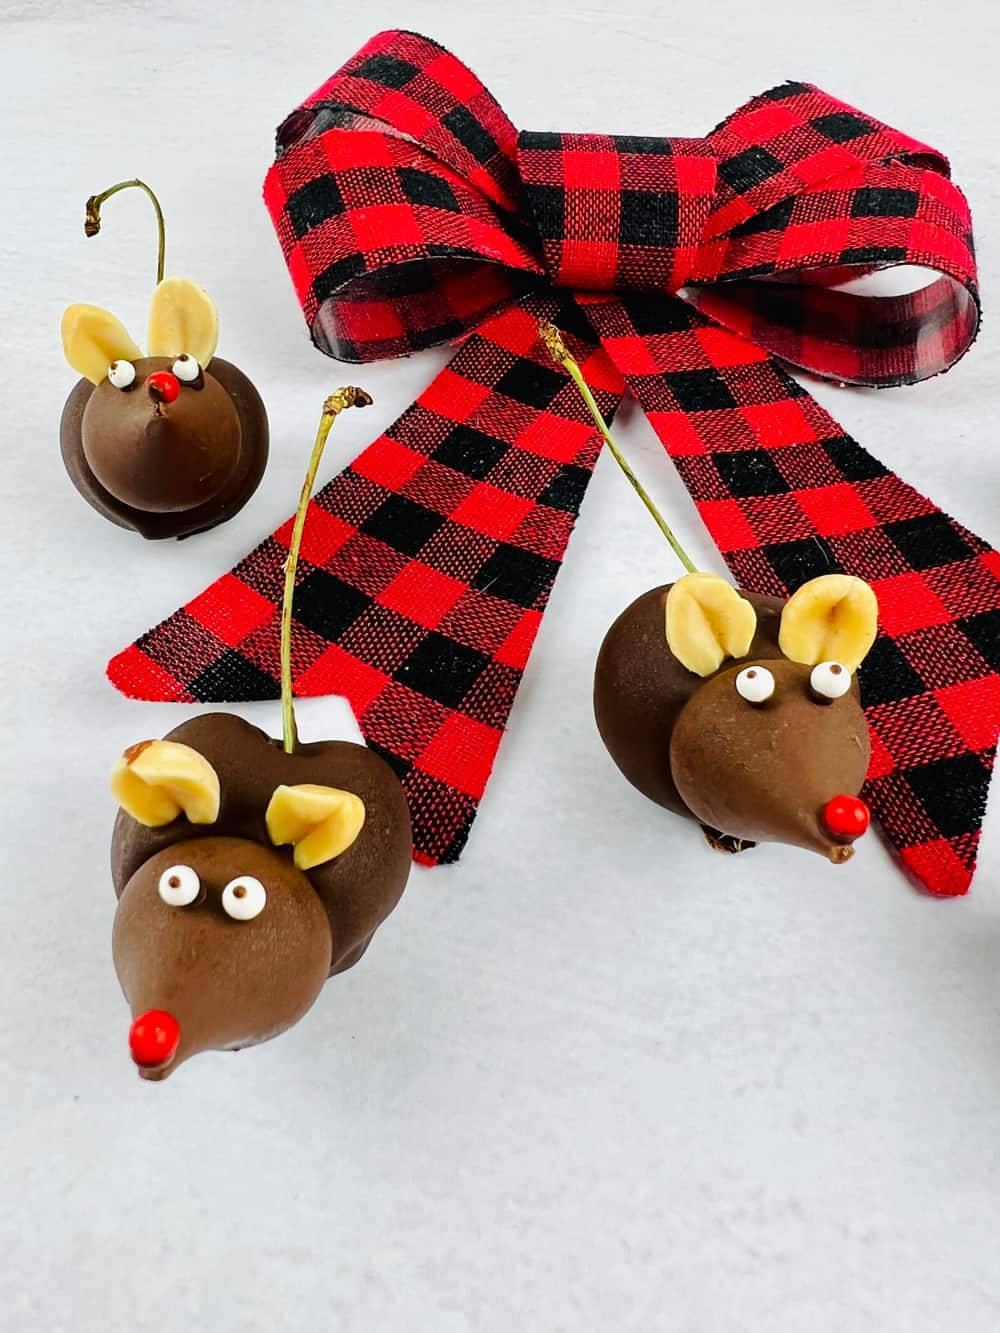 How to Make Chocolate Cherry Mice: The Cutest Chocolate Holiday Treat